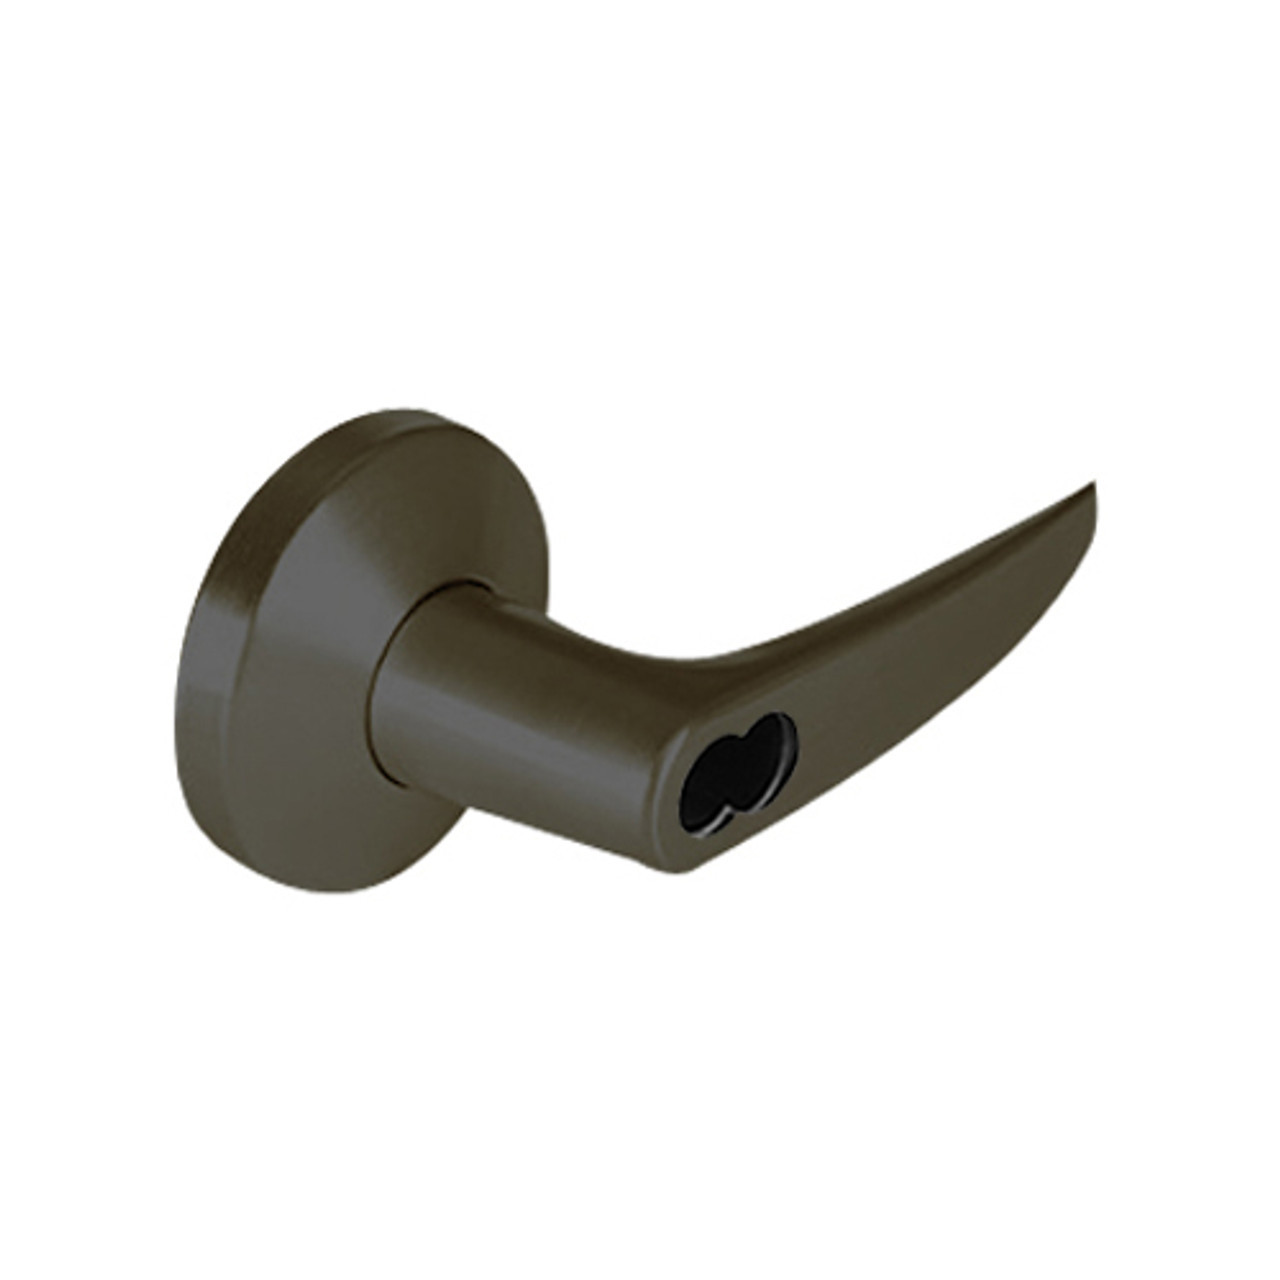 9K37RD16KS3613LM Best 9K Series Special Function Cylindrical Lever Locks with Curved without Return Lever Design Accept 7 Pin Best Core in Oil Rubbed Bronze